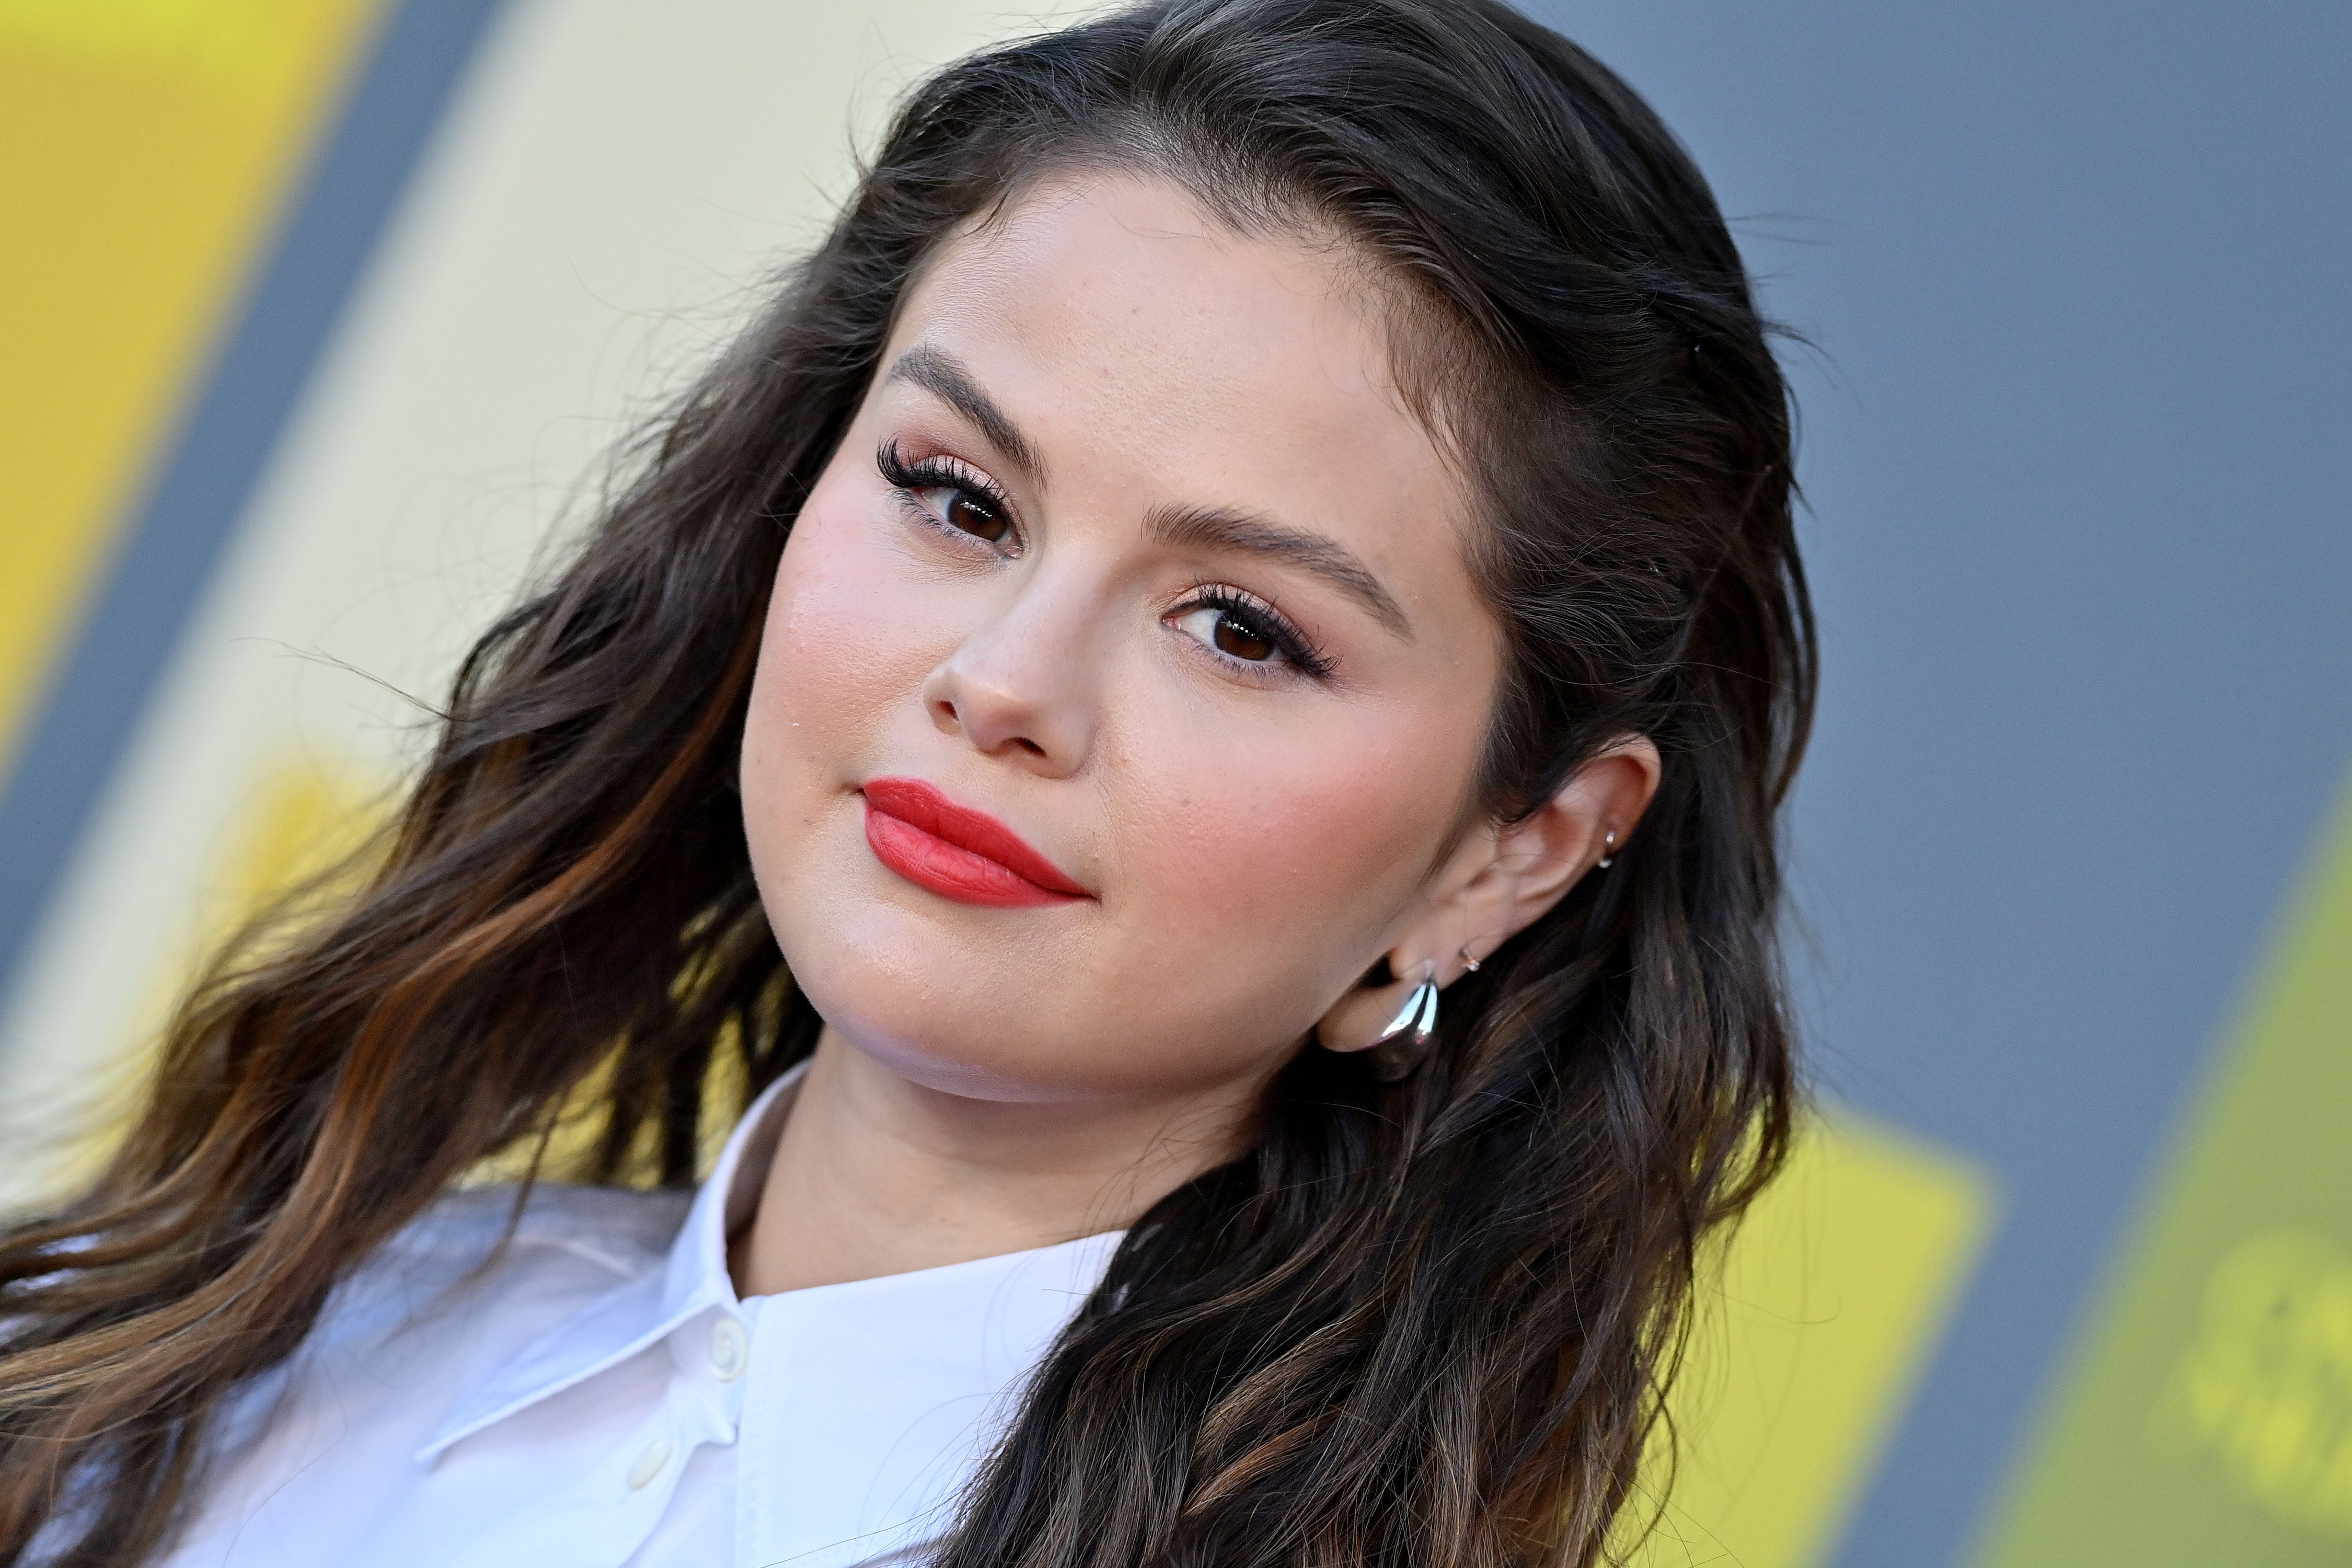 Selena Gomez Had The Perfect Accessory For Her Two Piece Houndstooth 'Fit